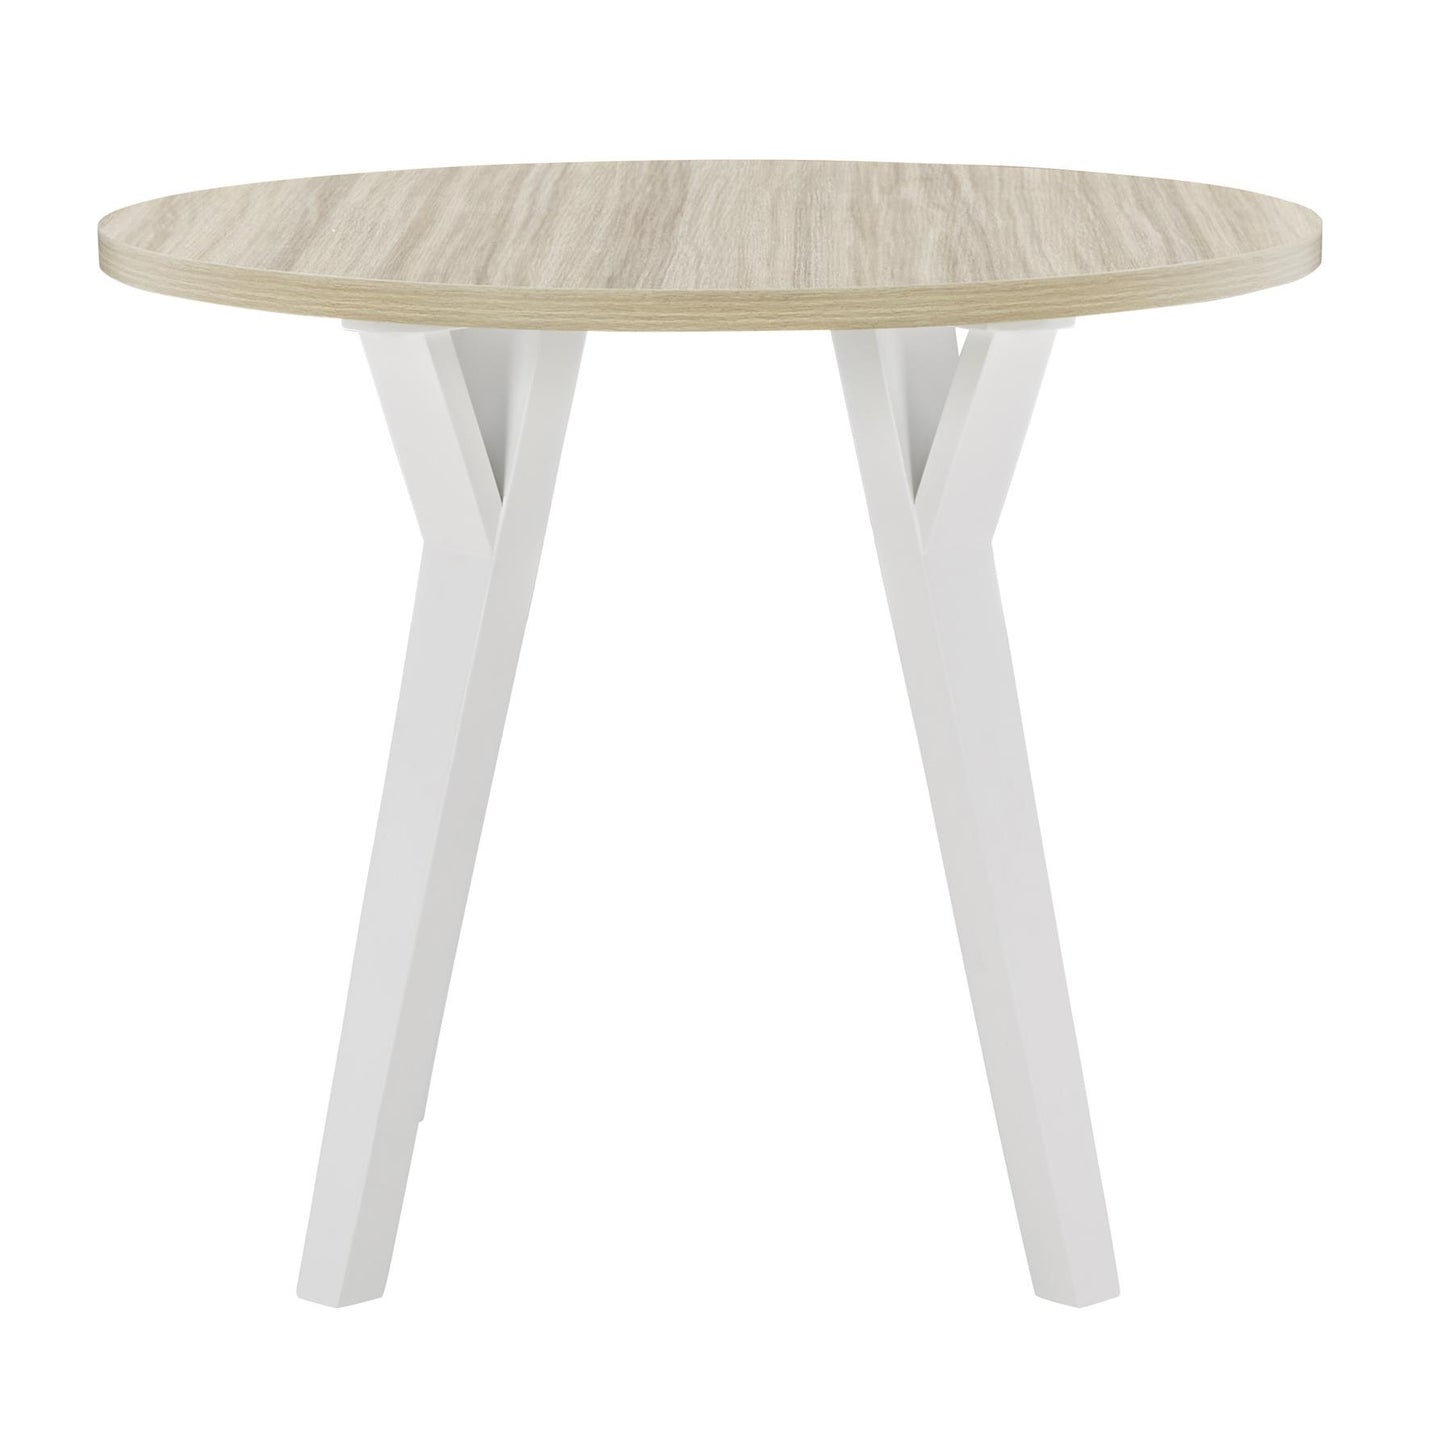 Signature Design by Ashley Round Grannen Dining Table D407-15